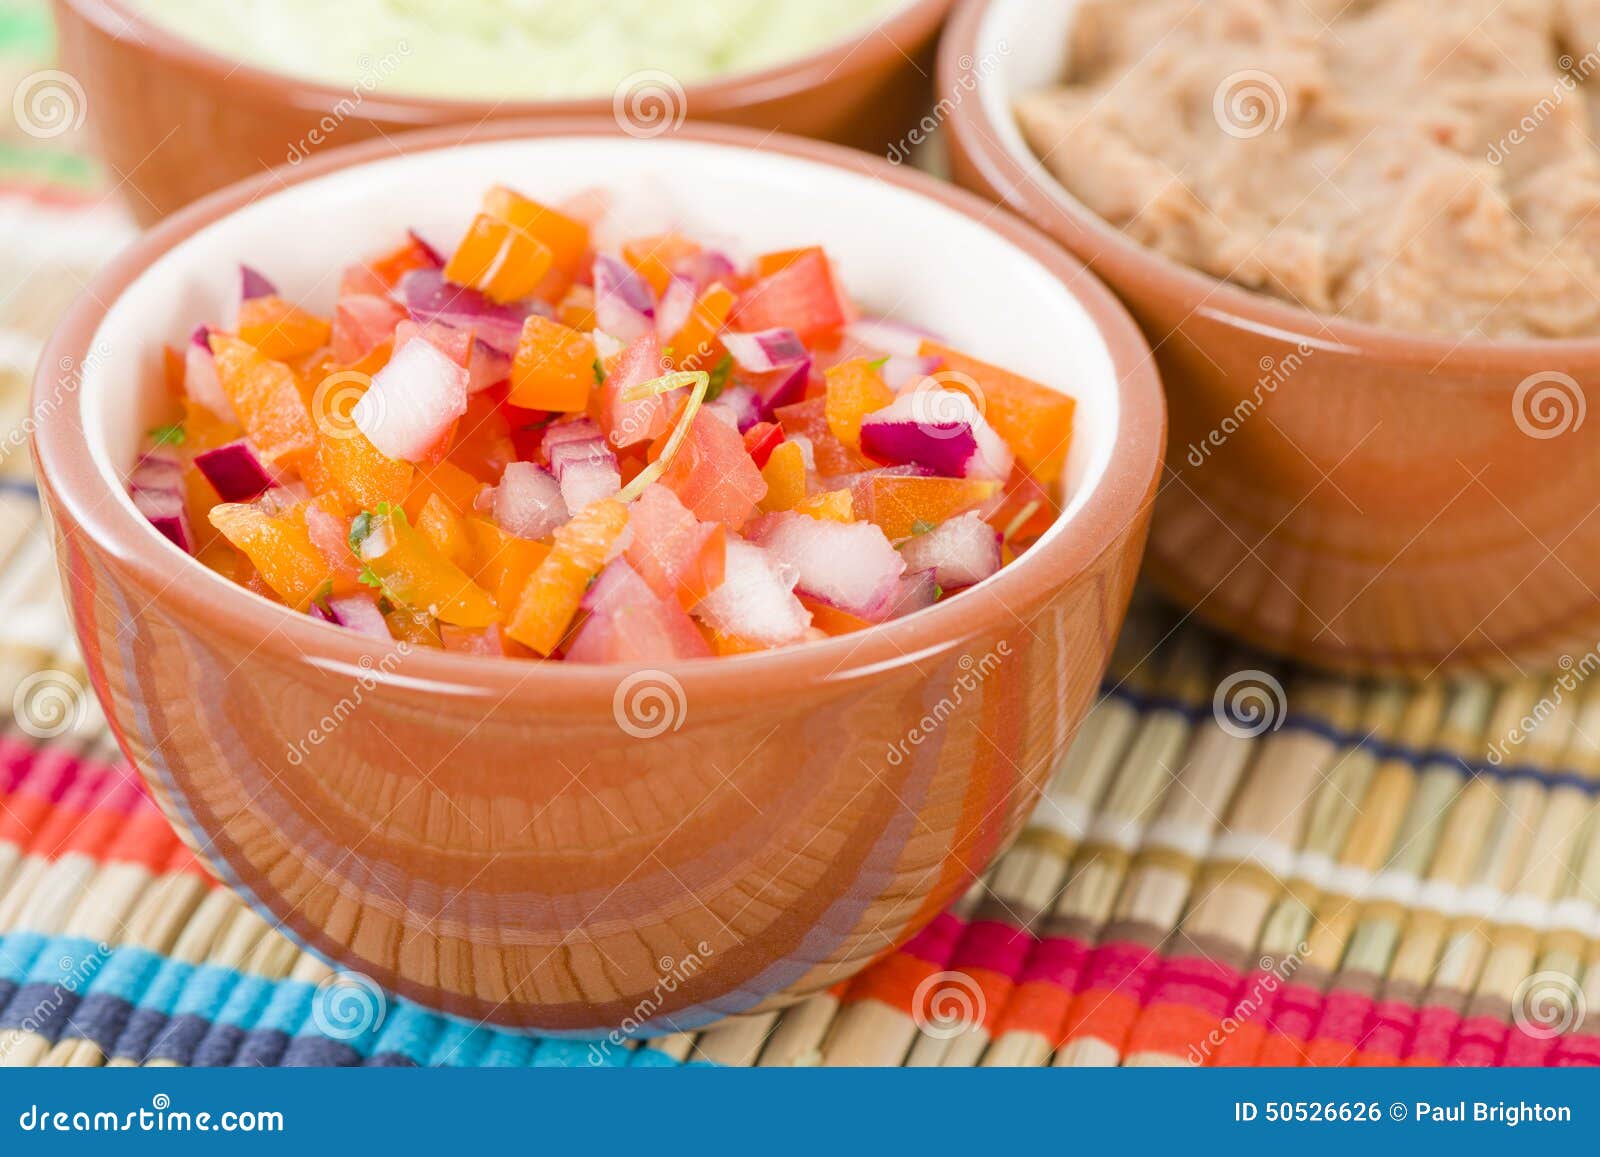 mexican dips & side dishes